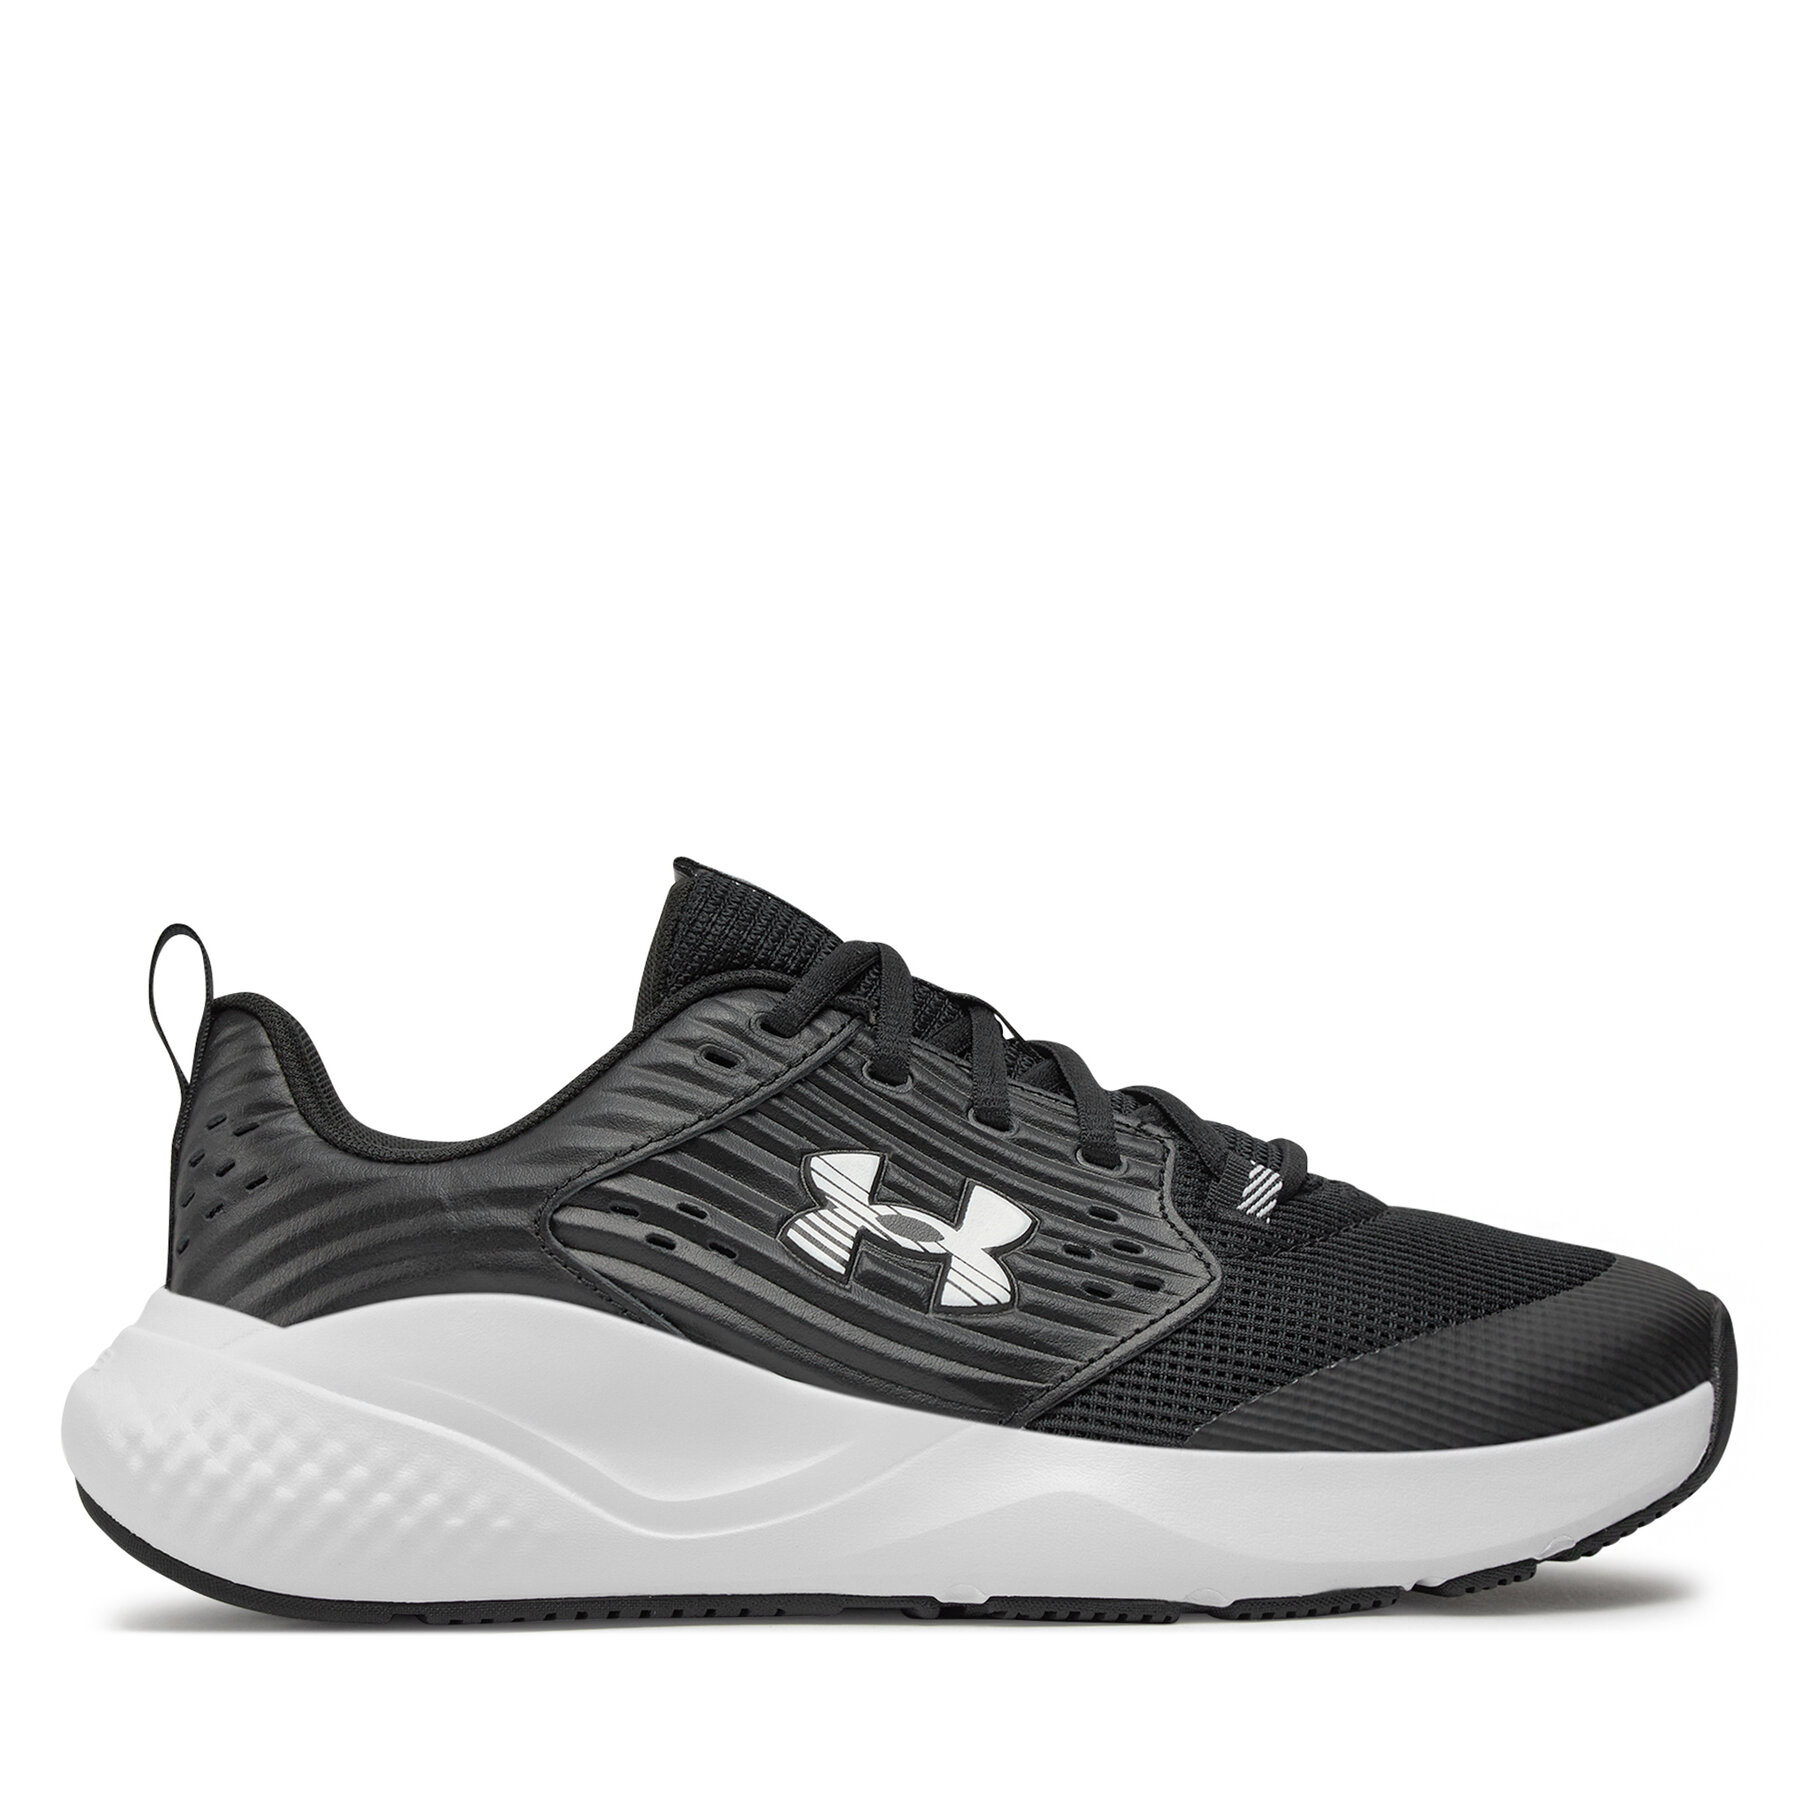 Schuhe Under Armour Ua Charged Commit Tr 4 3026017-004 Black/Anthracite/White von Under Armour